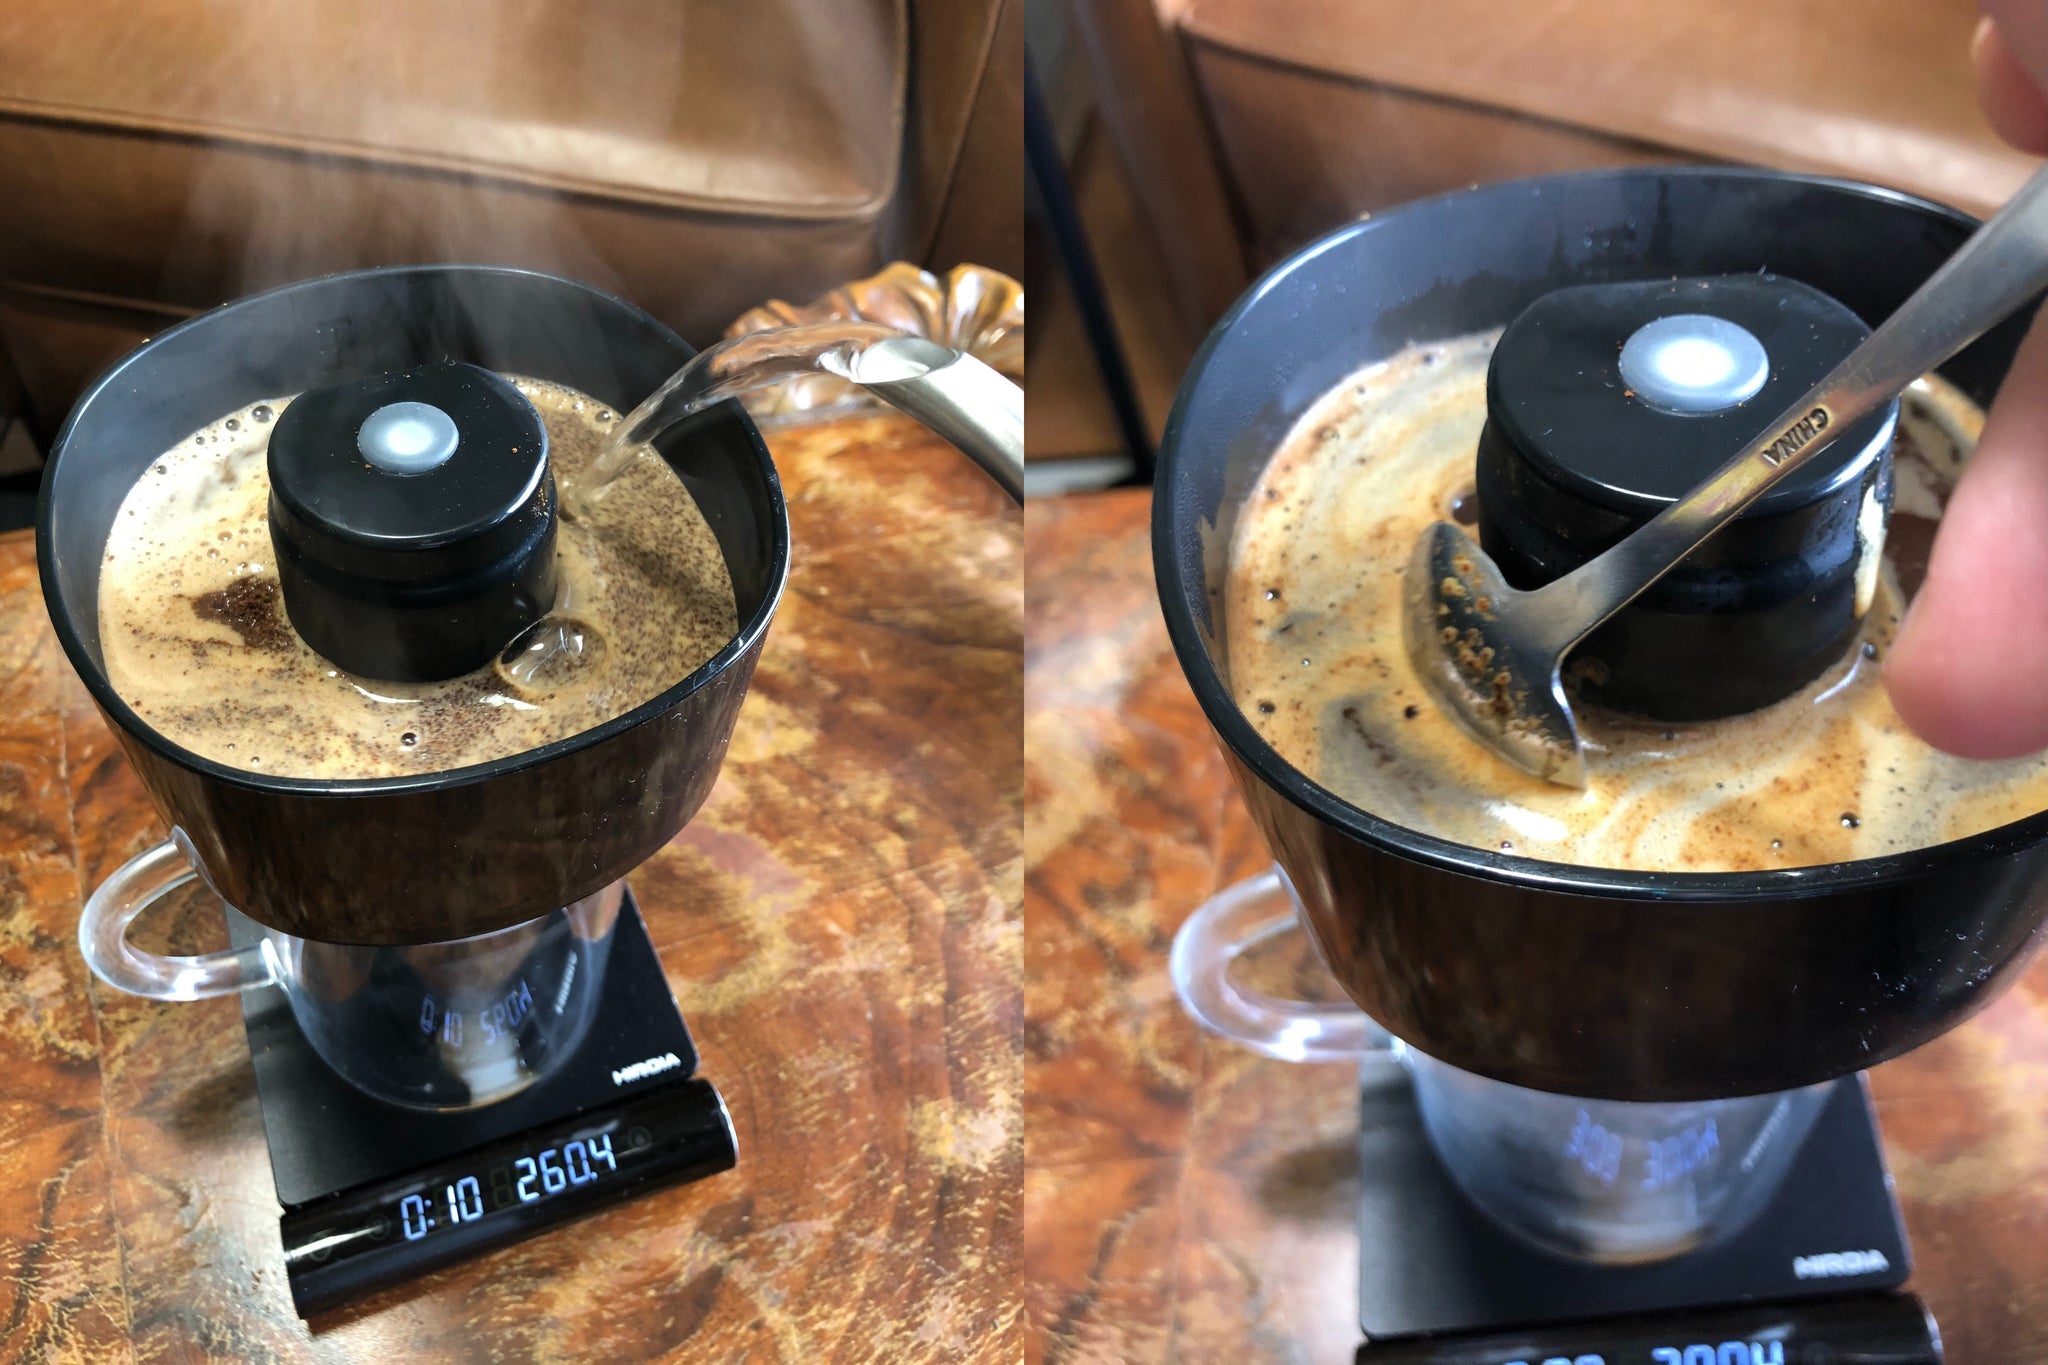 (L) Vigorously pouring hot water over ground coffee; (R): Breaking the crust with a cupping spoon